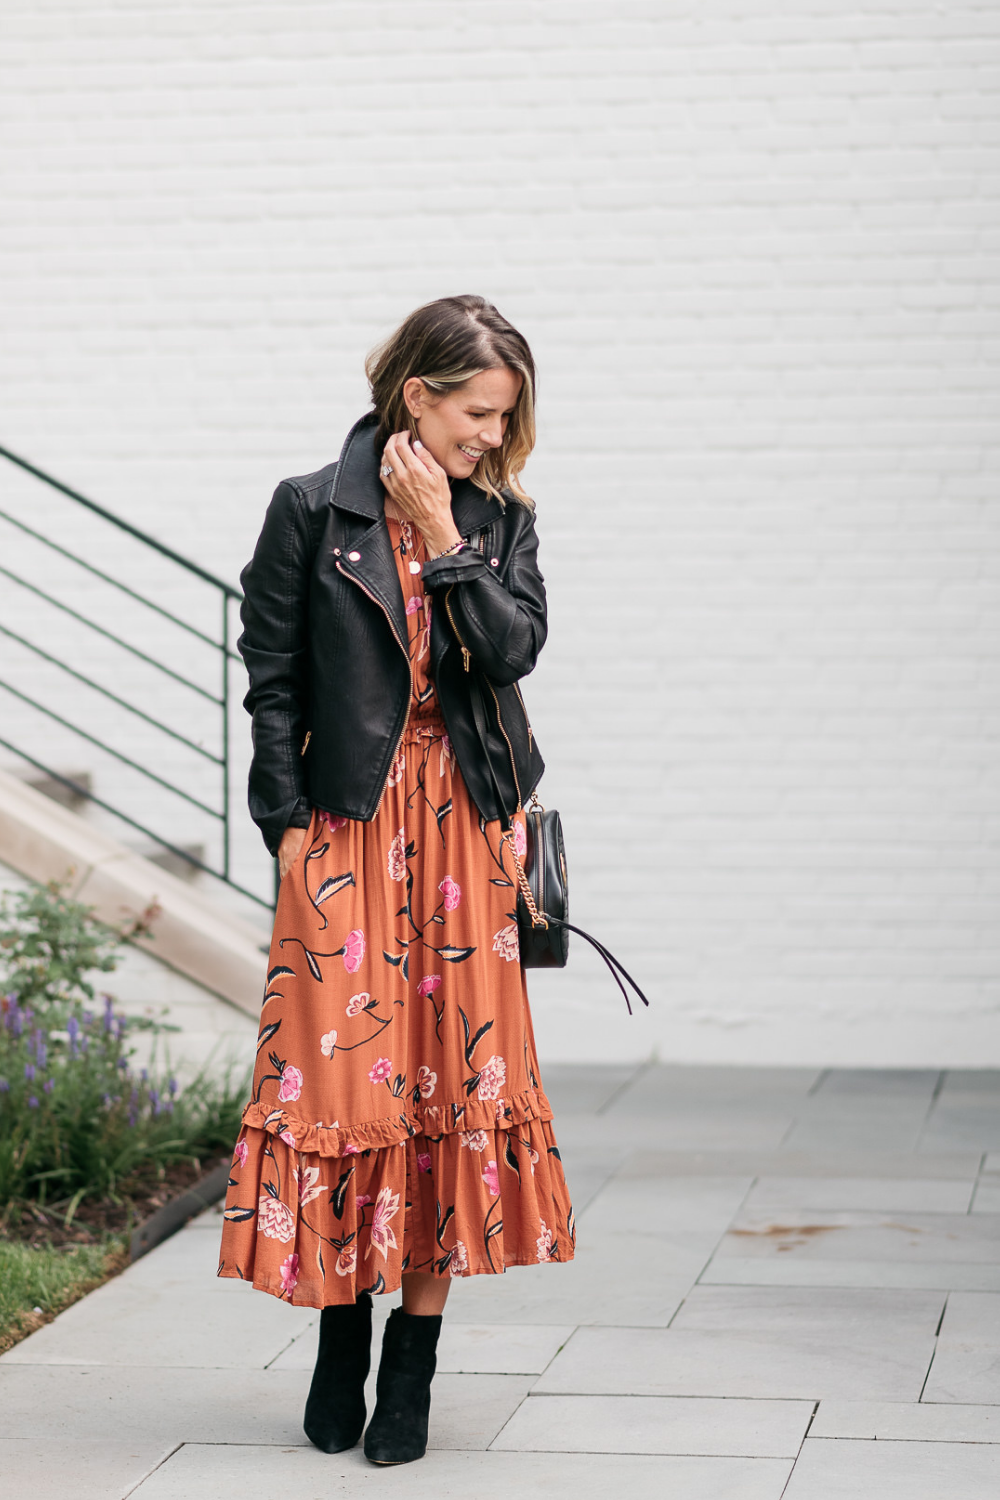 Floral Maxi Dress  Fall Style Under $30 - My Kind of Sweet